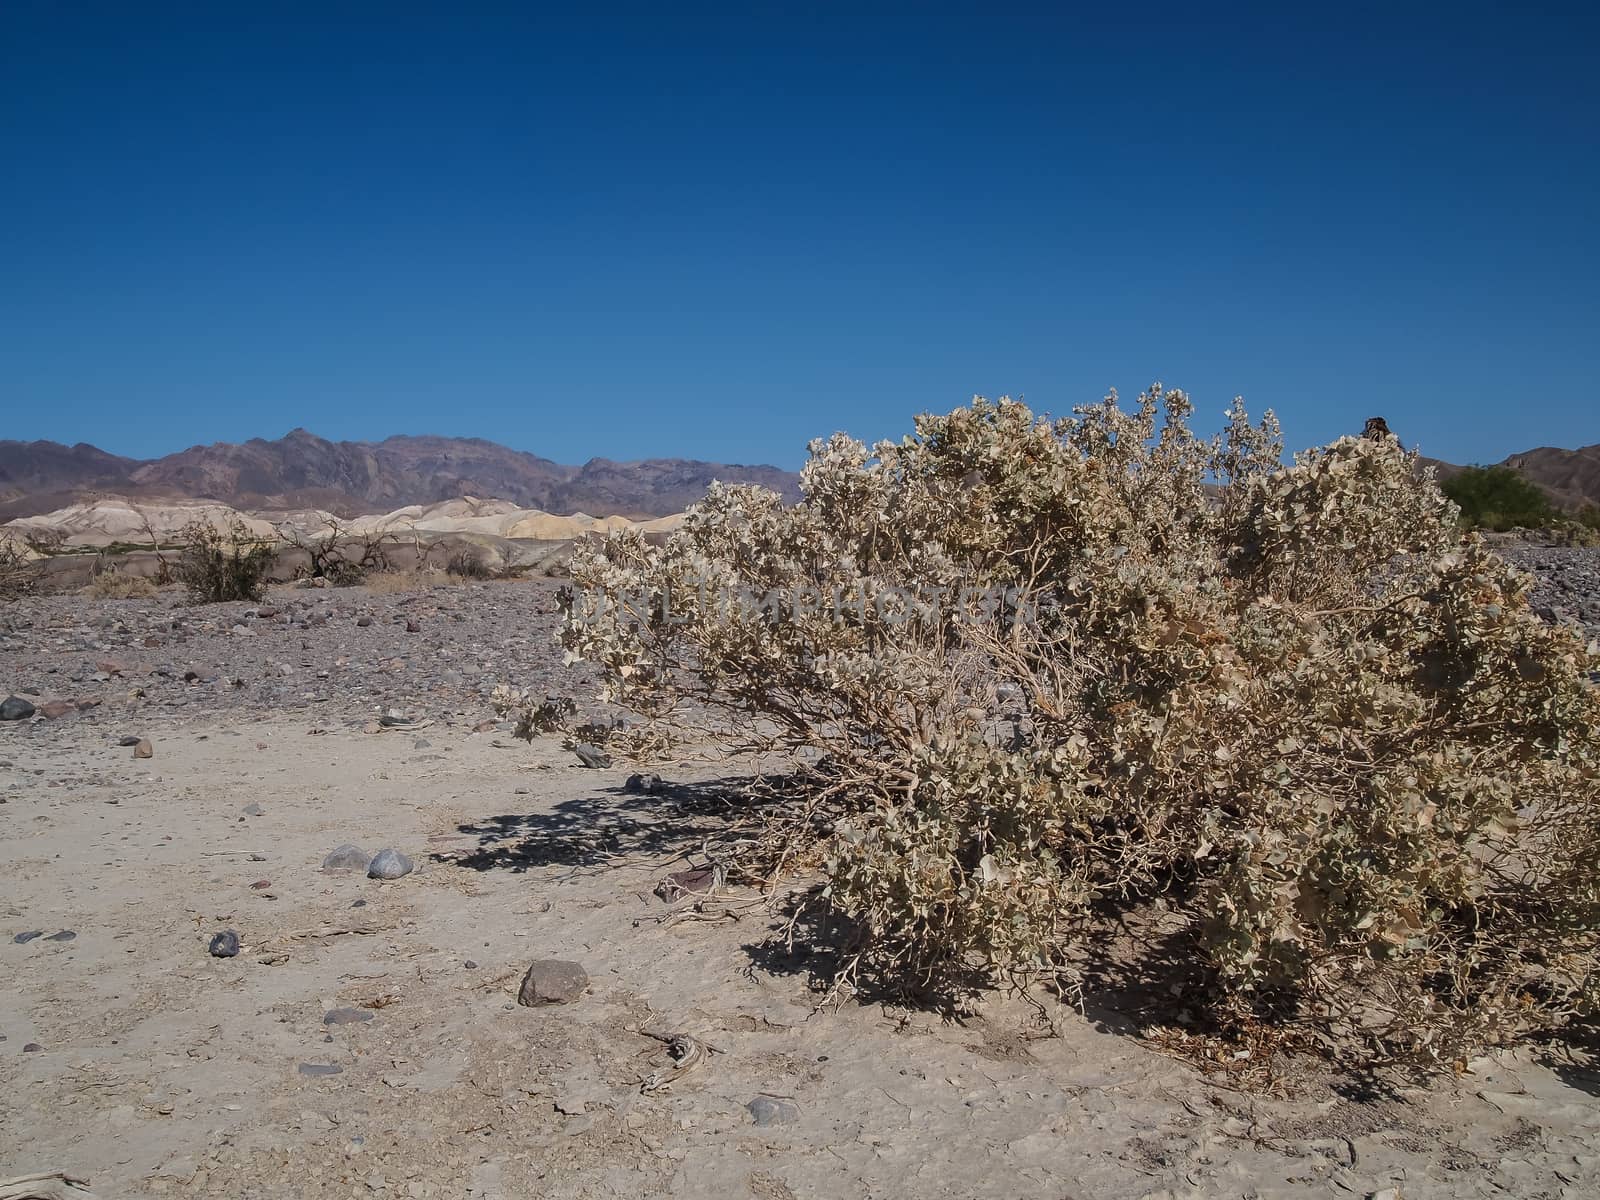 Image of Mountains, dry tree and desert landscape with blue sky. Death Valley National park, USA